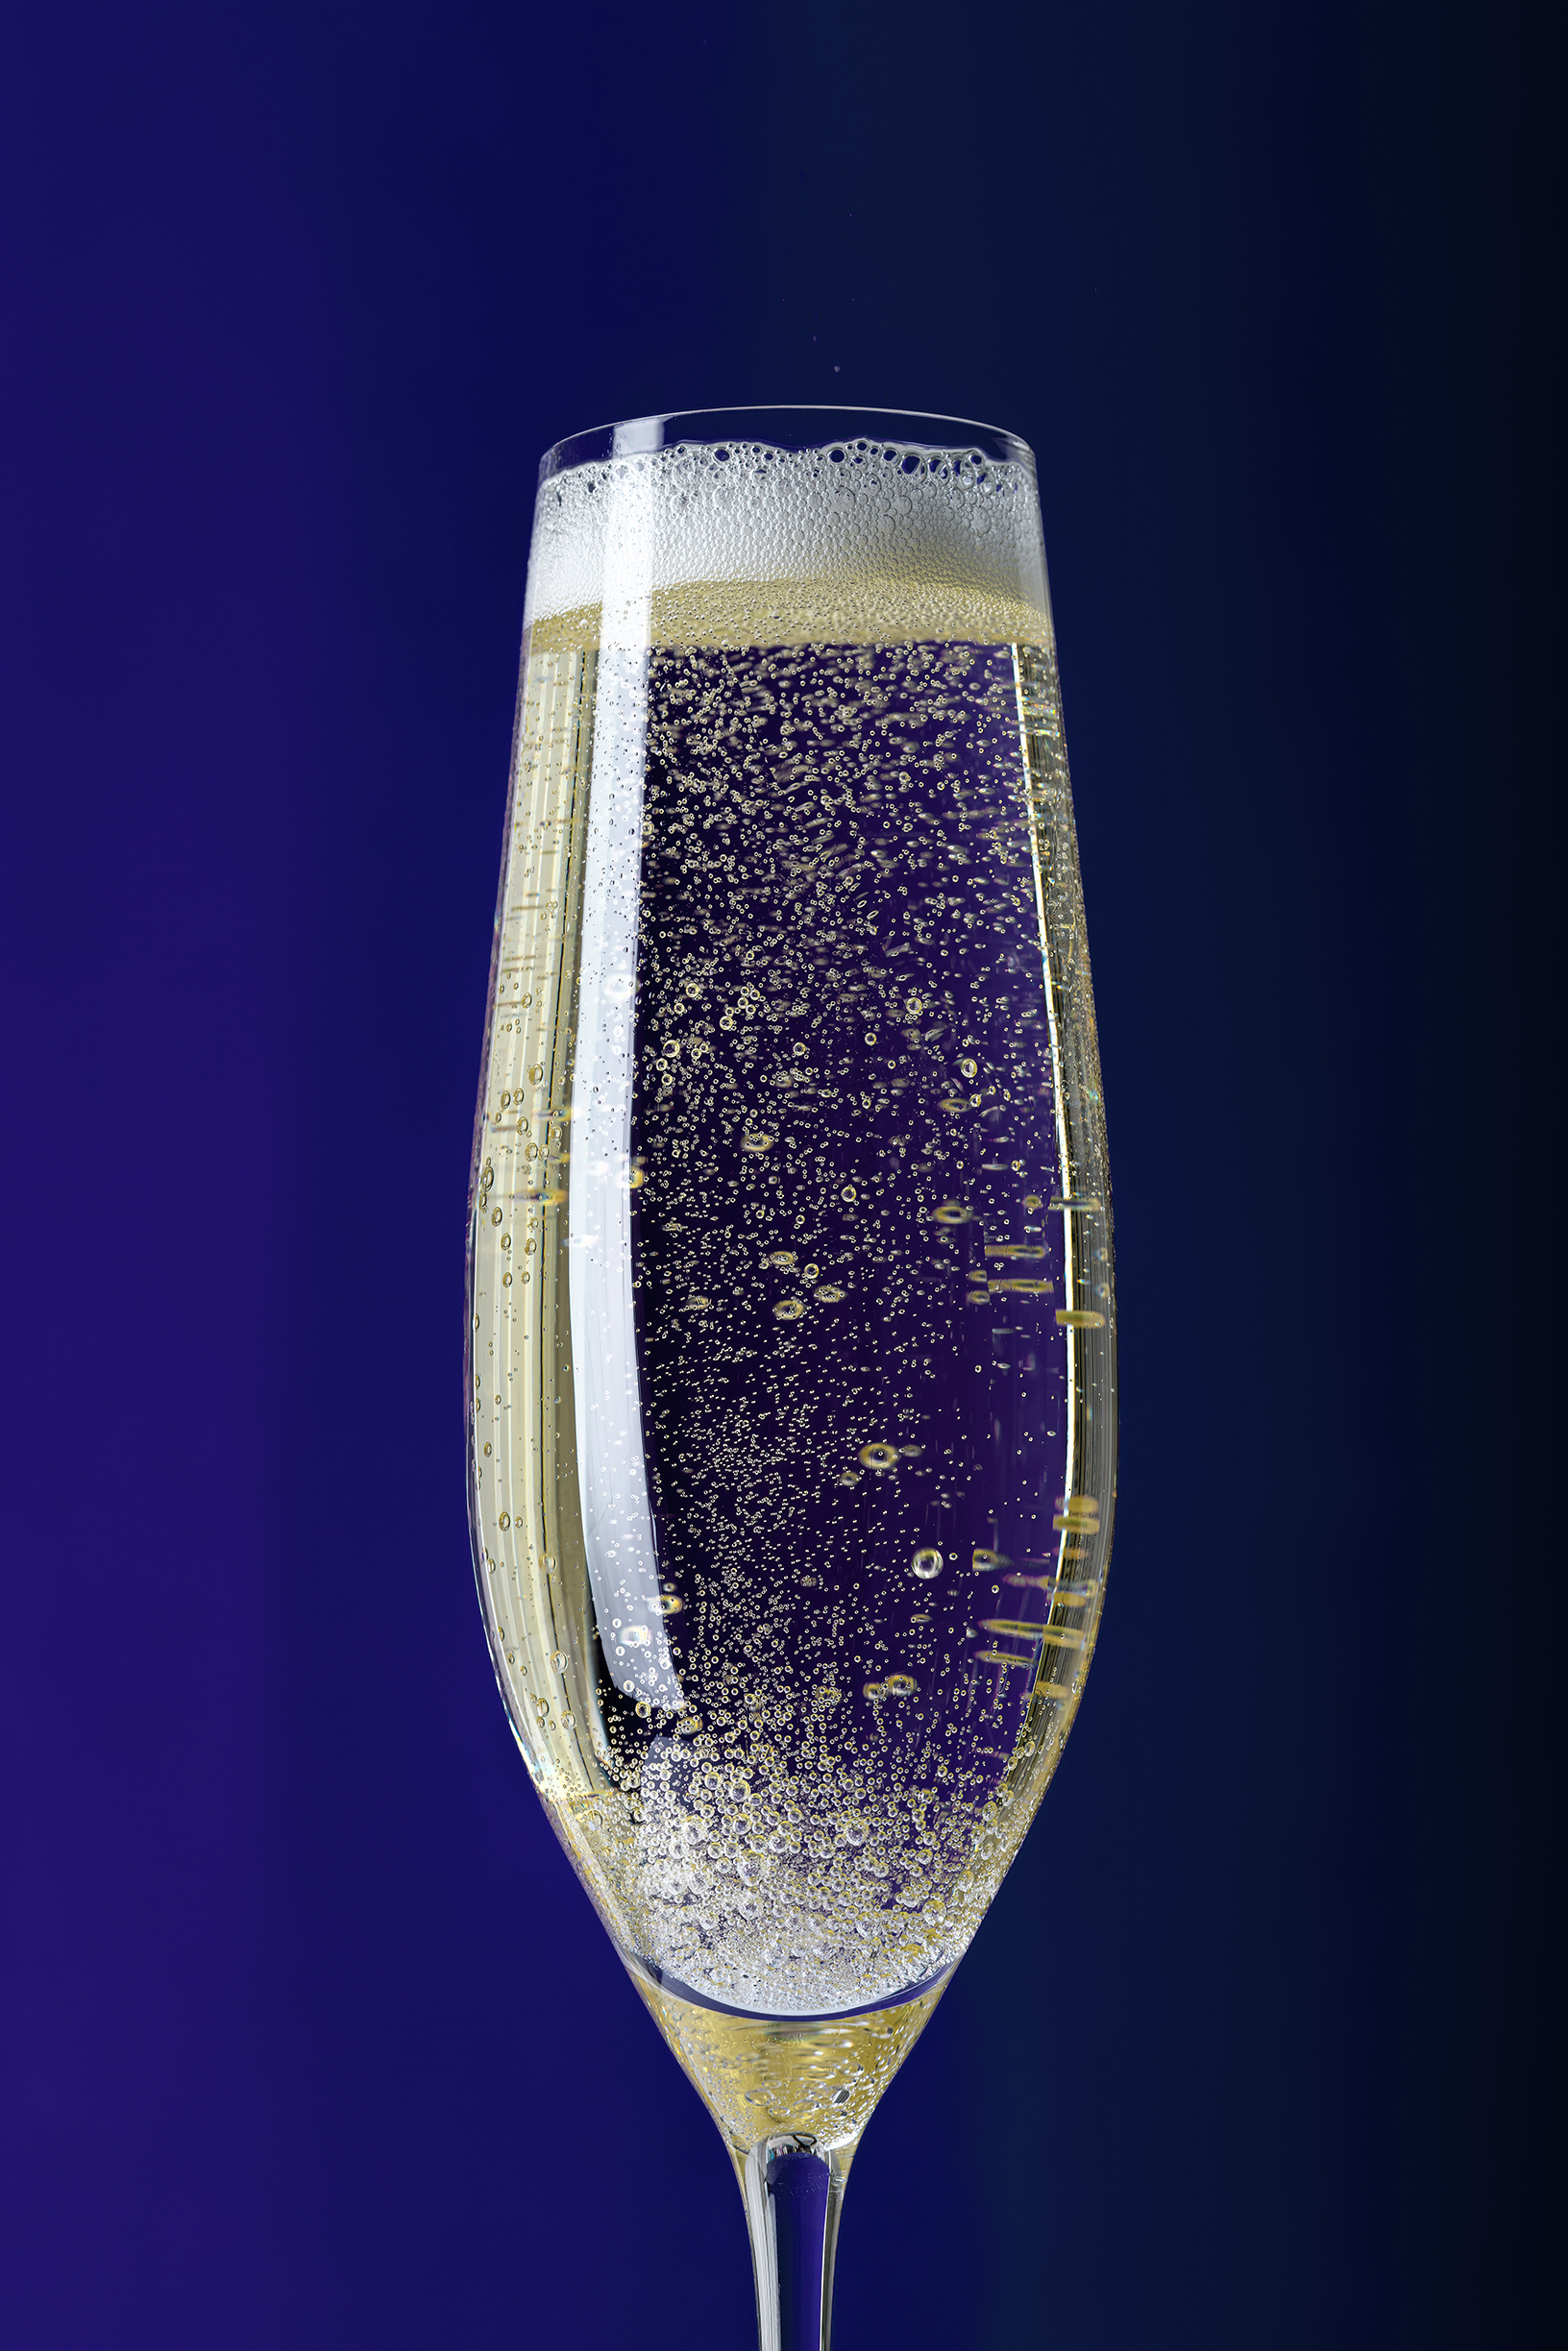 Drinks photographer, drinks photography Champagne in a flute glass with bubbles on a blue background